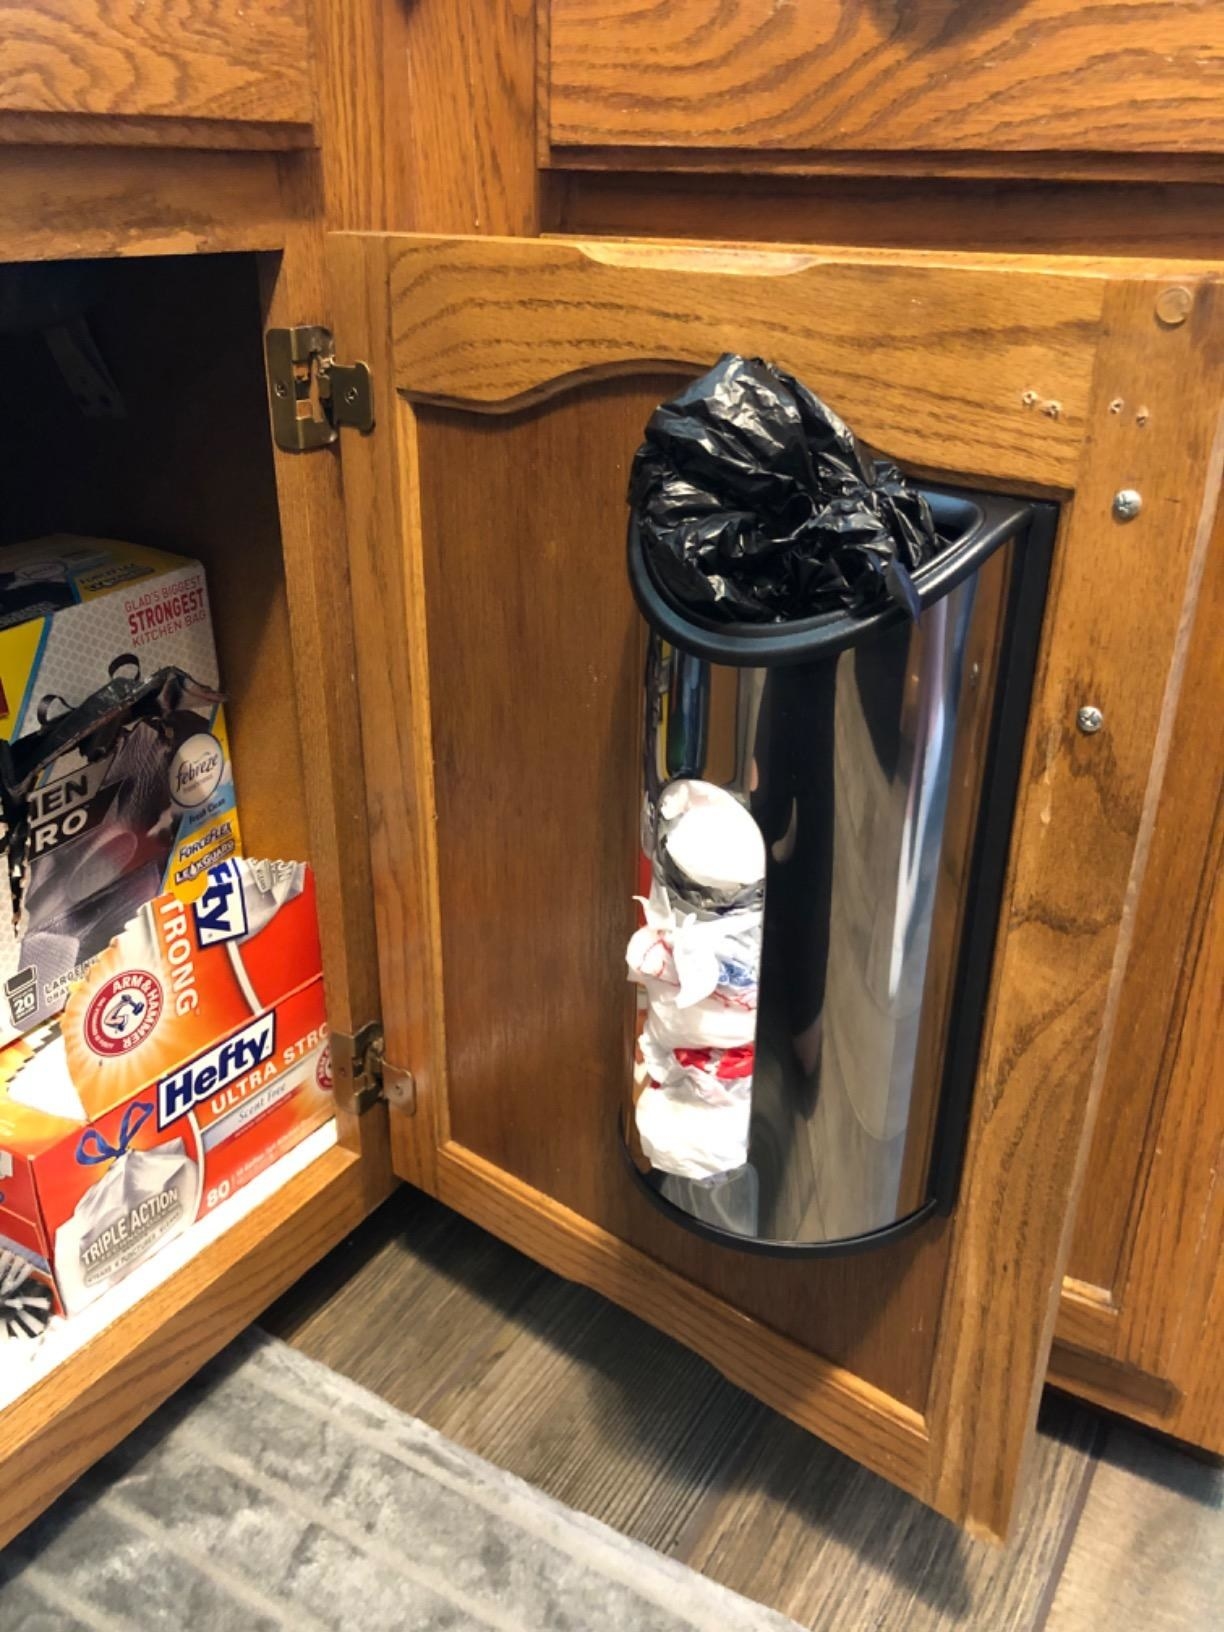 A stainless steel and black plastic bag dispenser mounted inside a kitchen cabinet